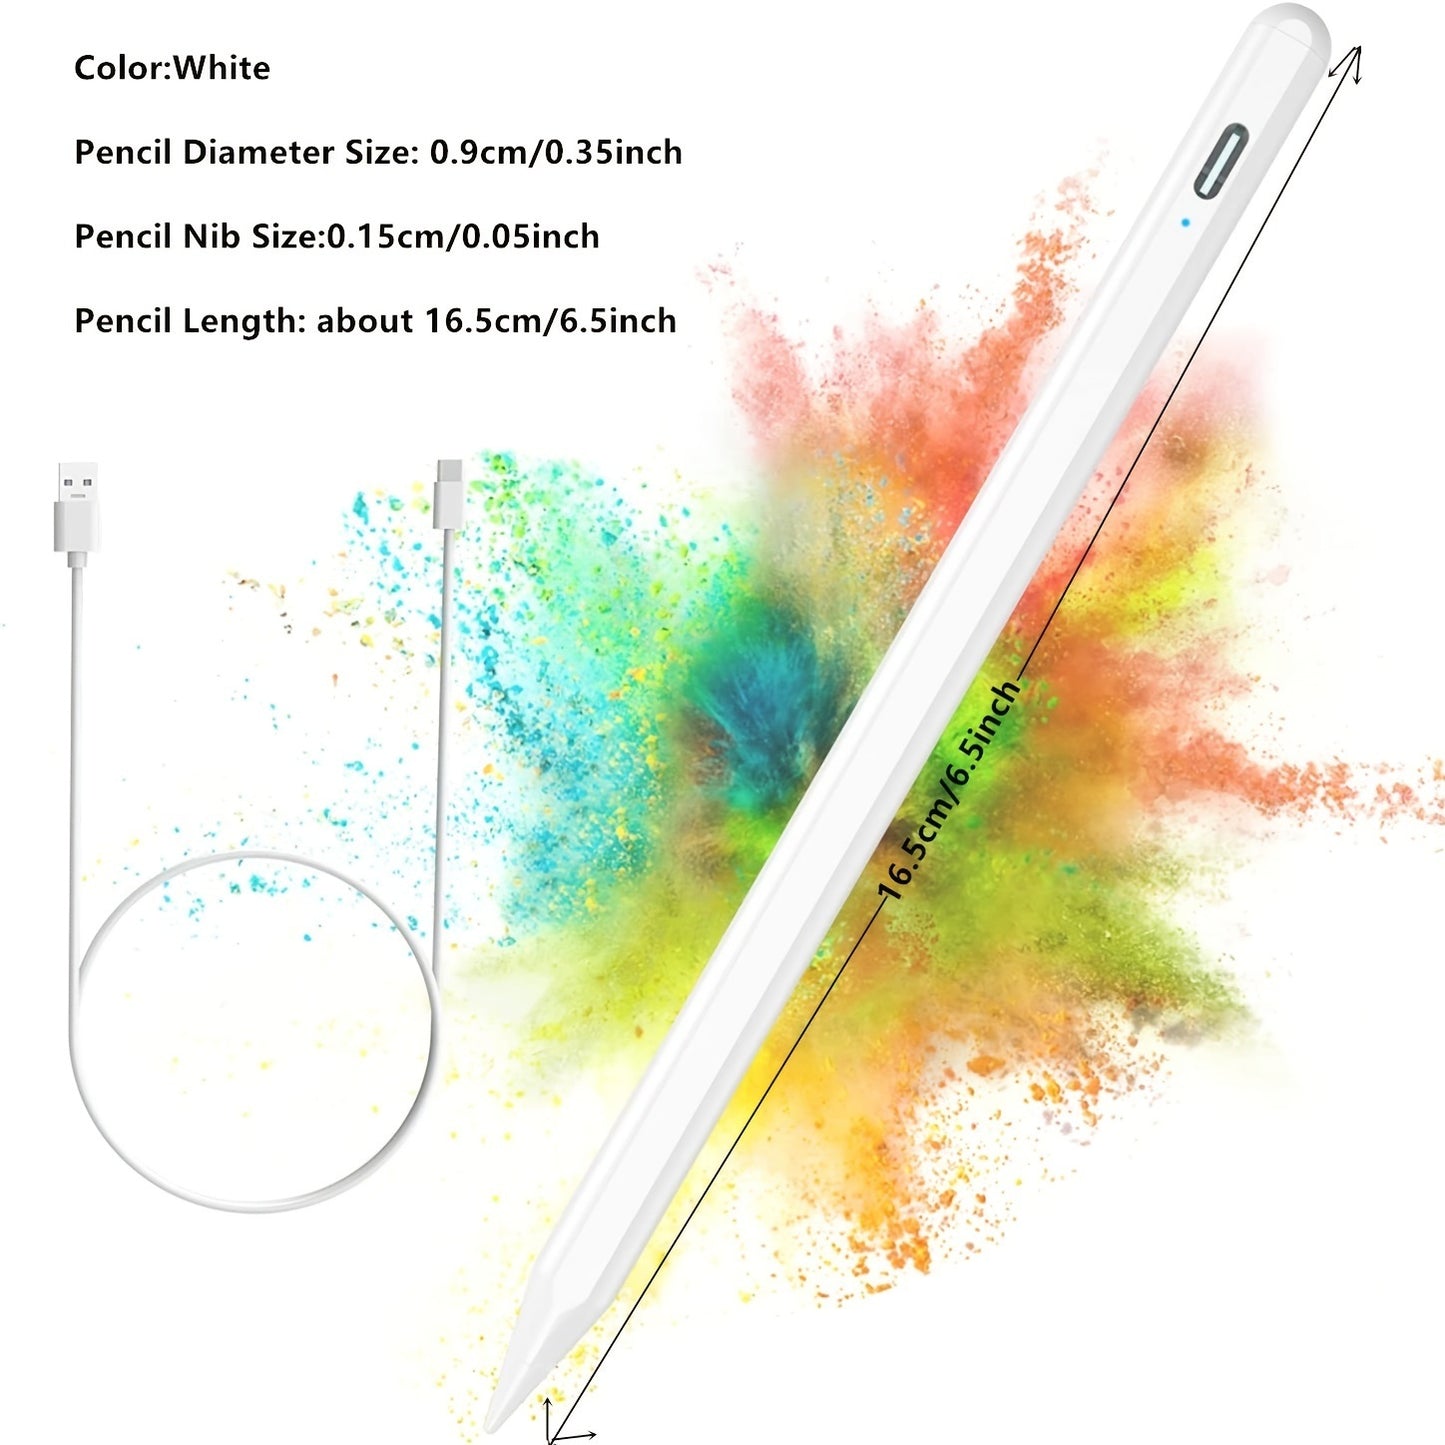 Stylus Pen For IPad With Palm Rejection